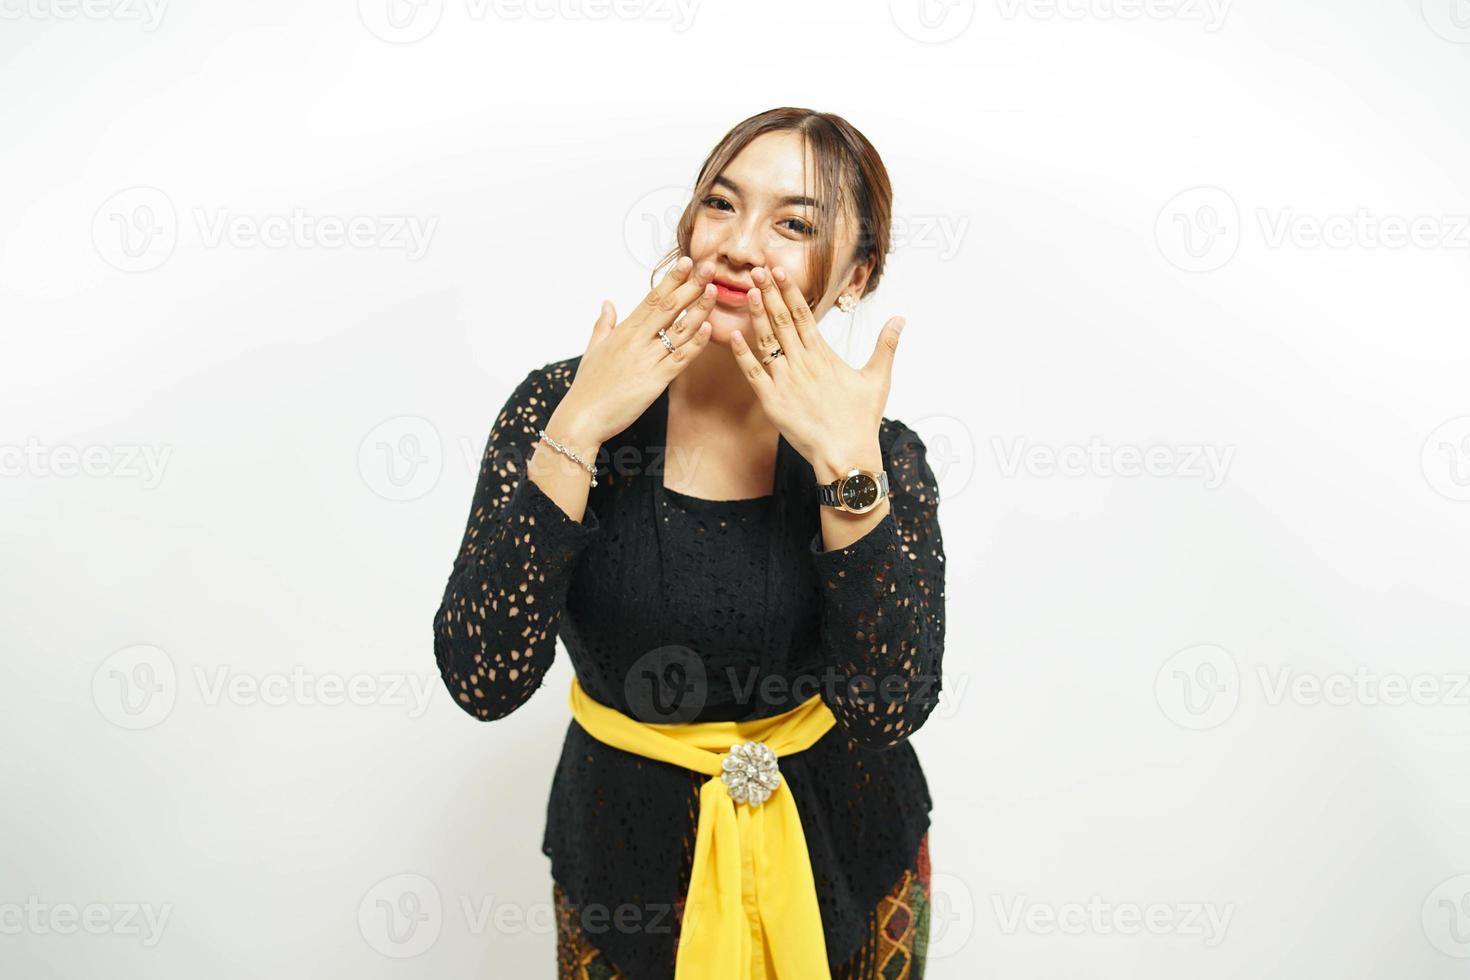 Balinese woman expresses her shock with a hand over her mouth, photo